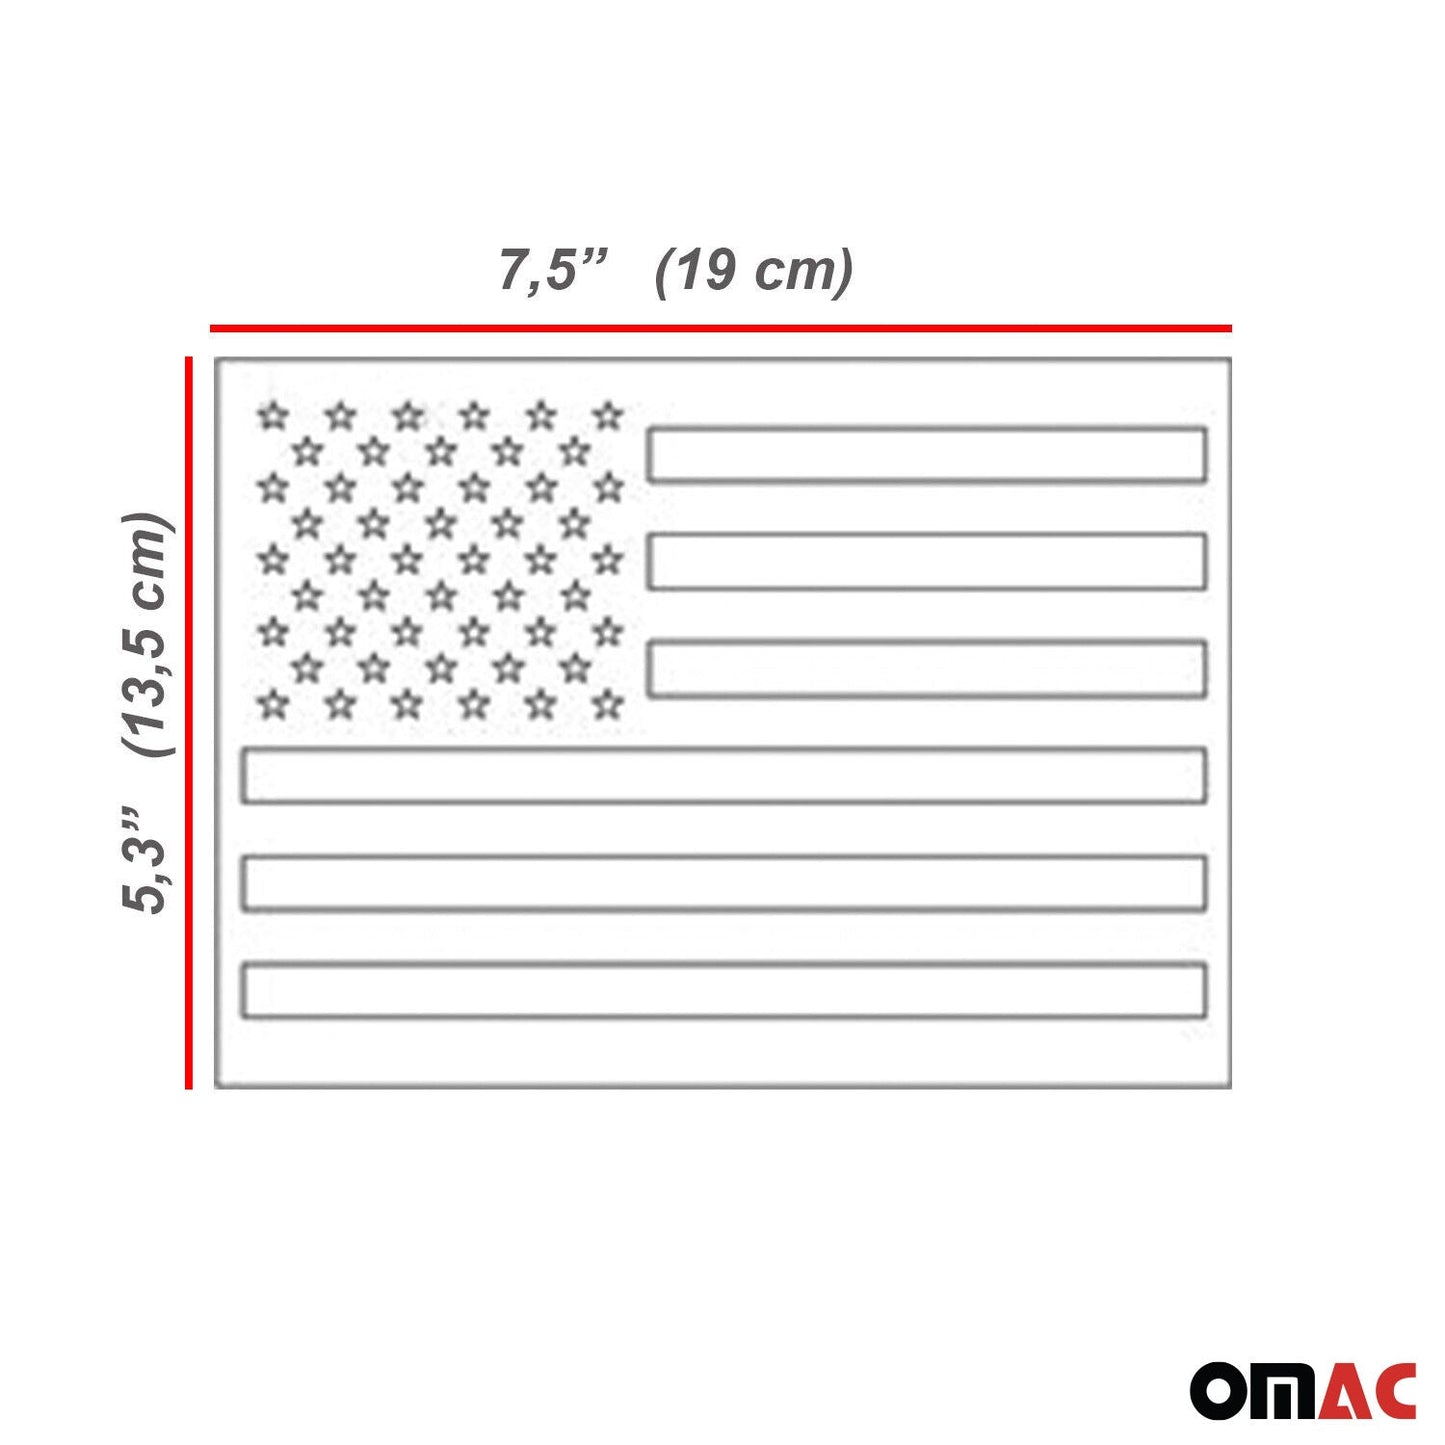 OMAC 2 Pcs US American Flag for RAM 3500 Chrome Decal Sticker Stainless Steel U022164